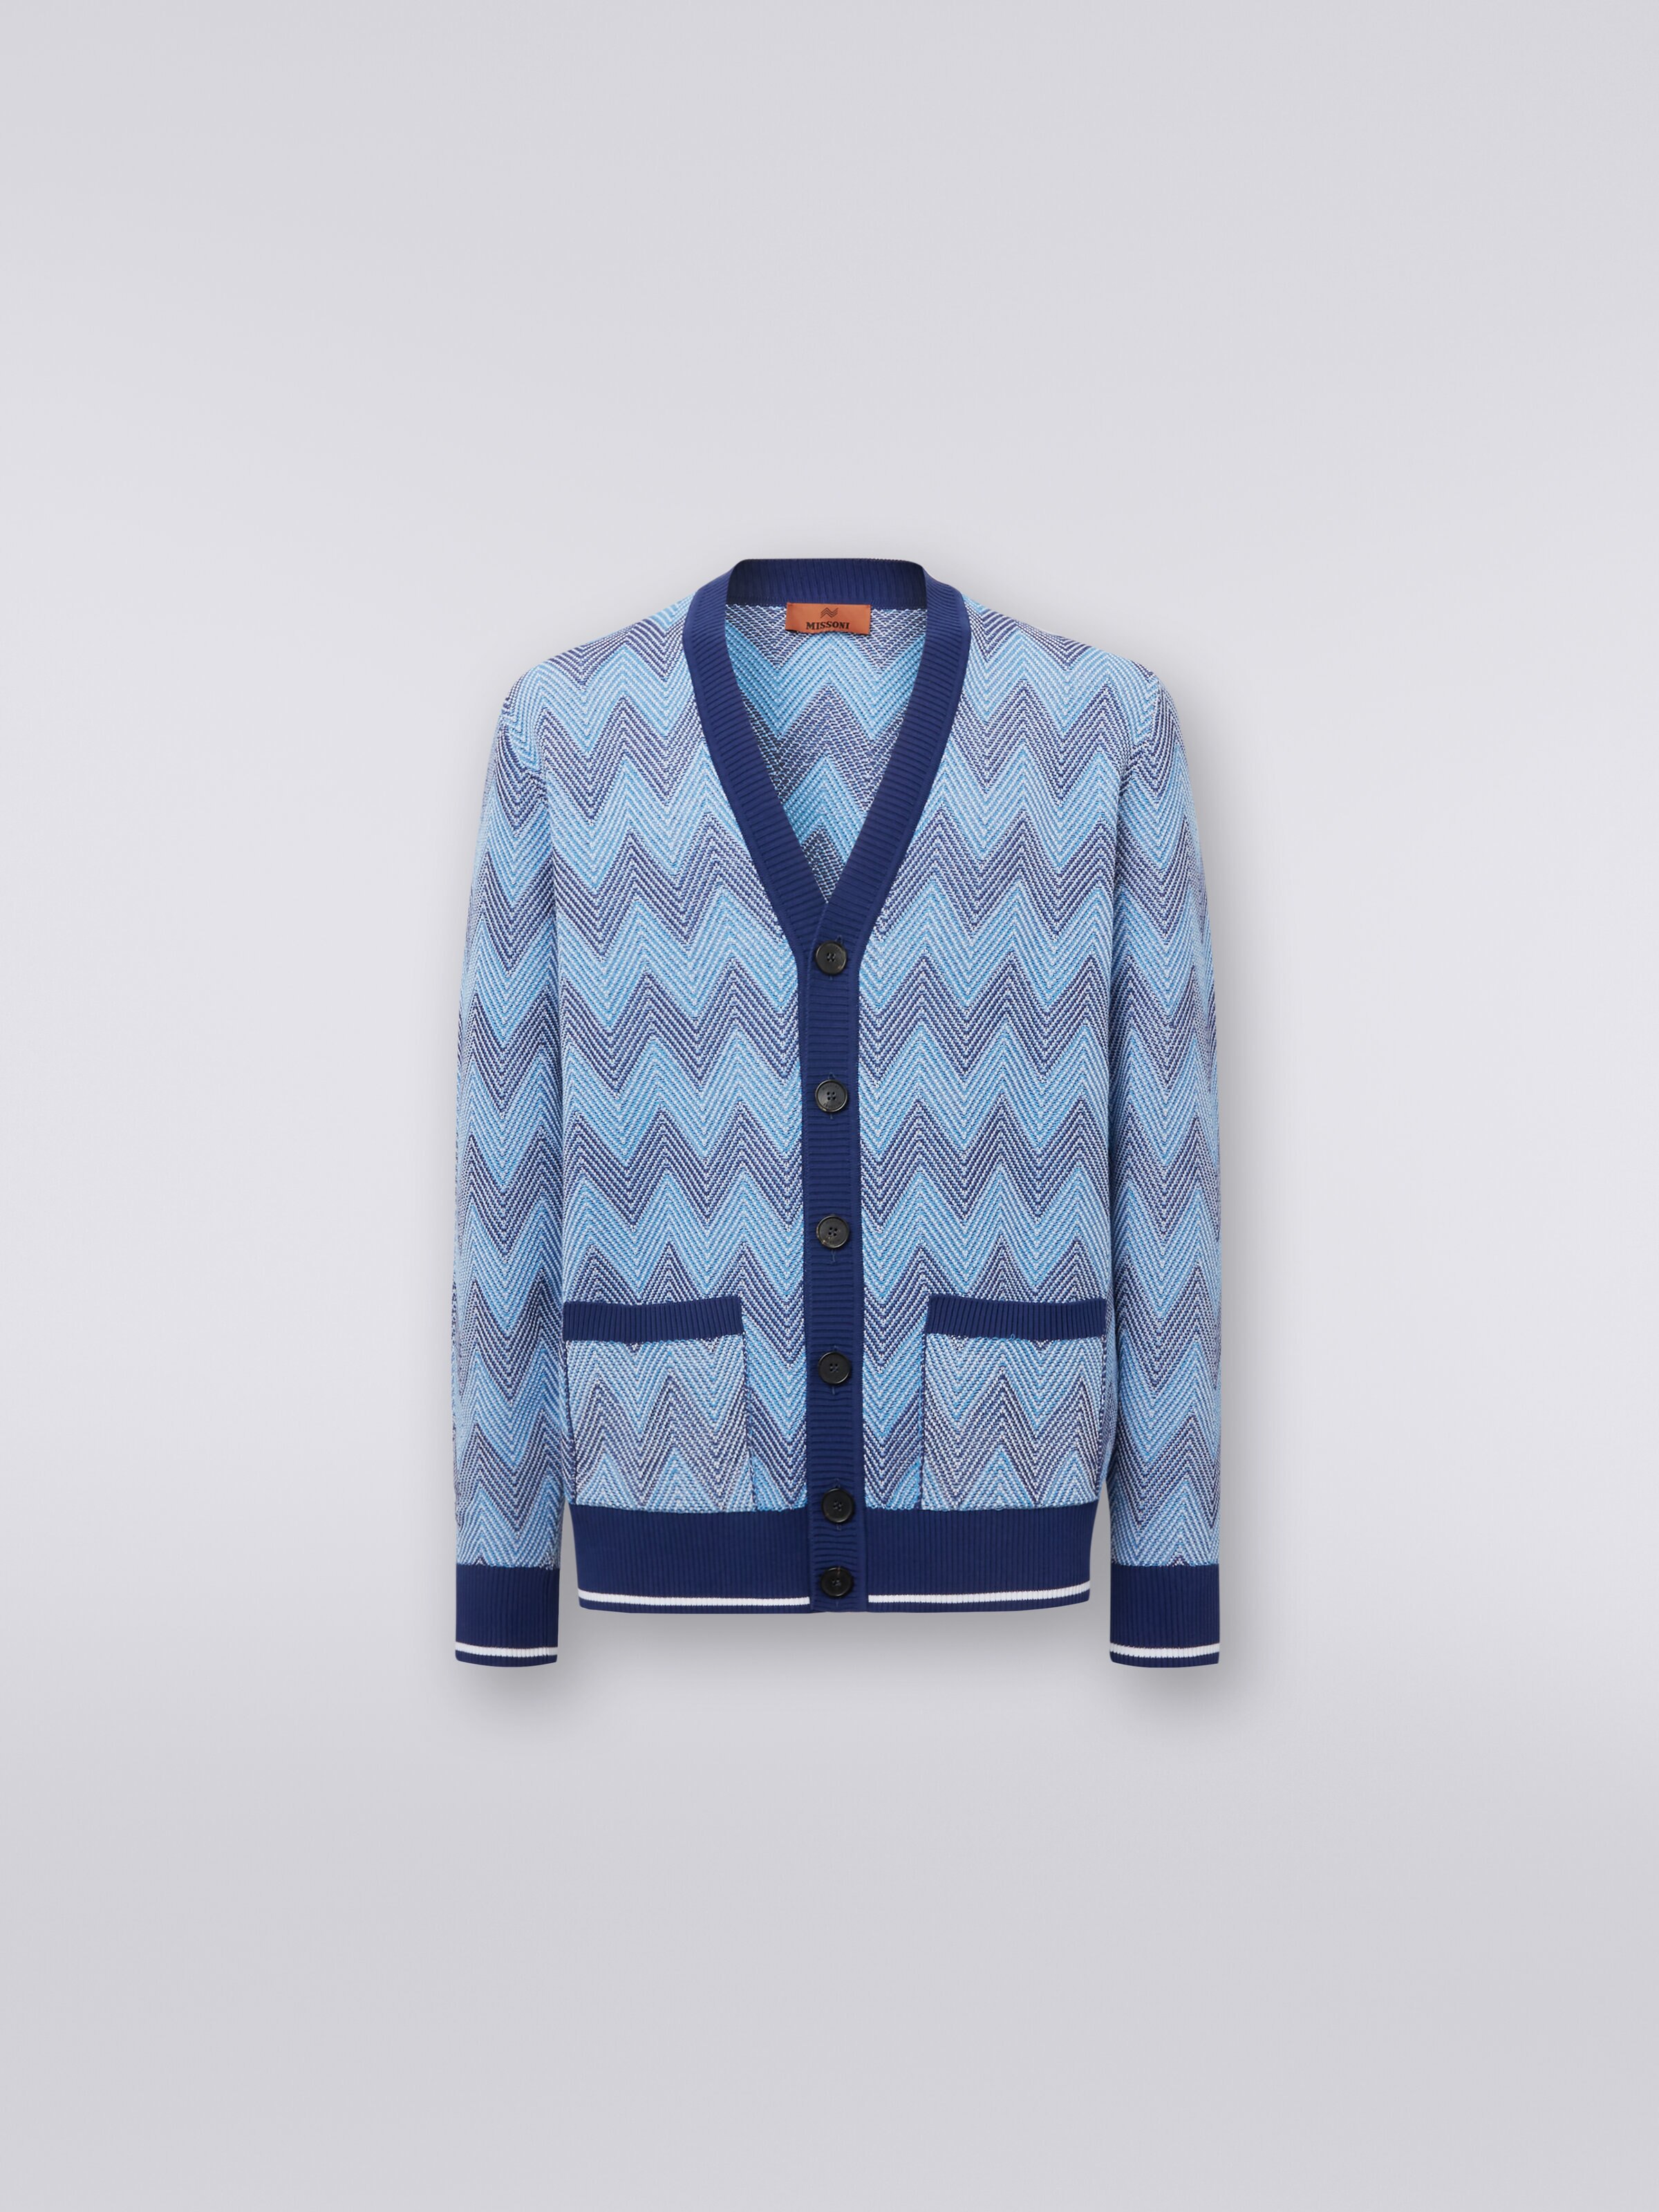 Cardigan in chevron cotton knit with contrasting trim, Blue - 0